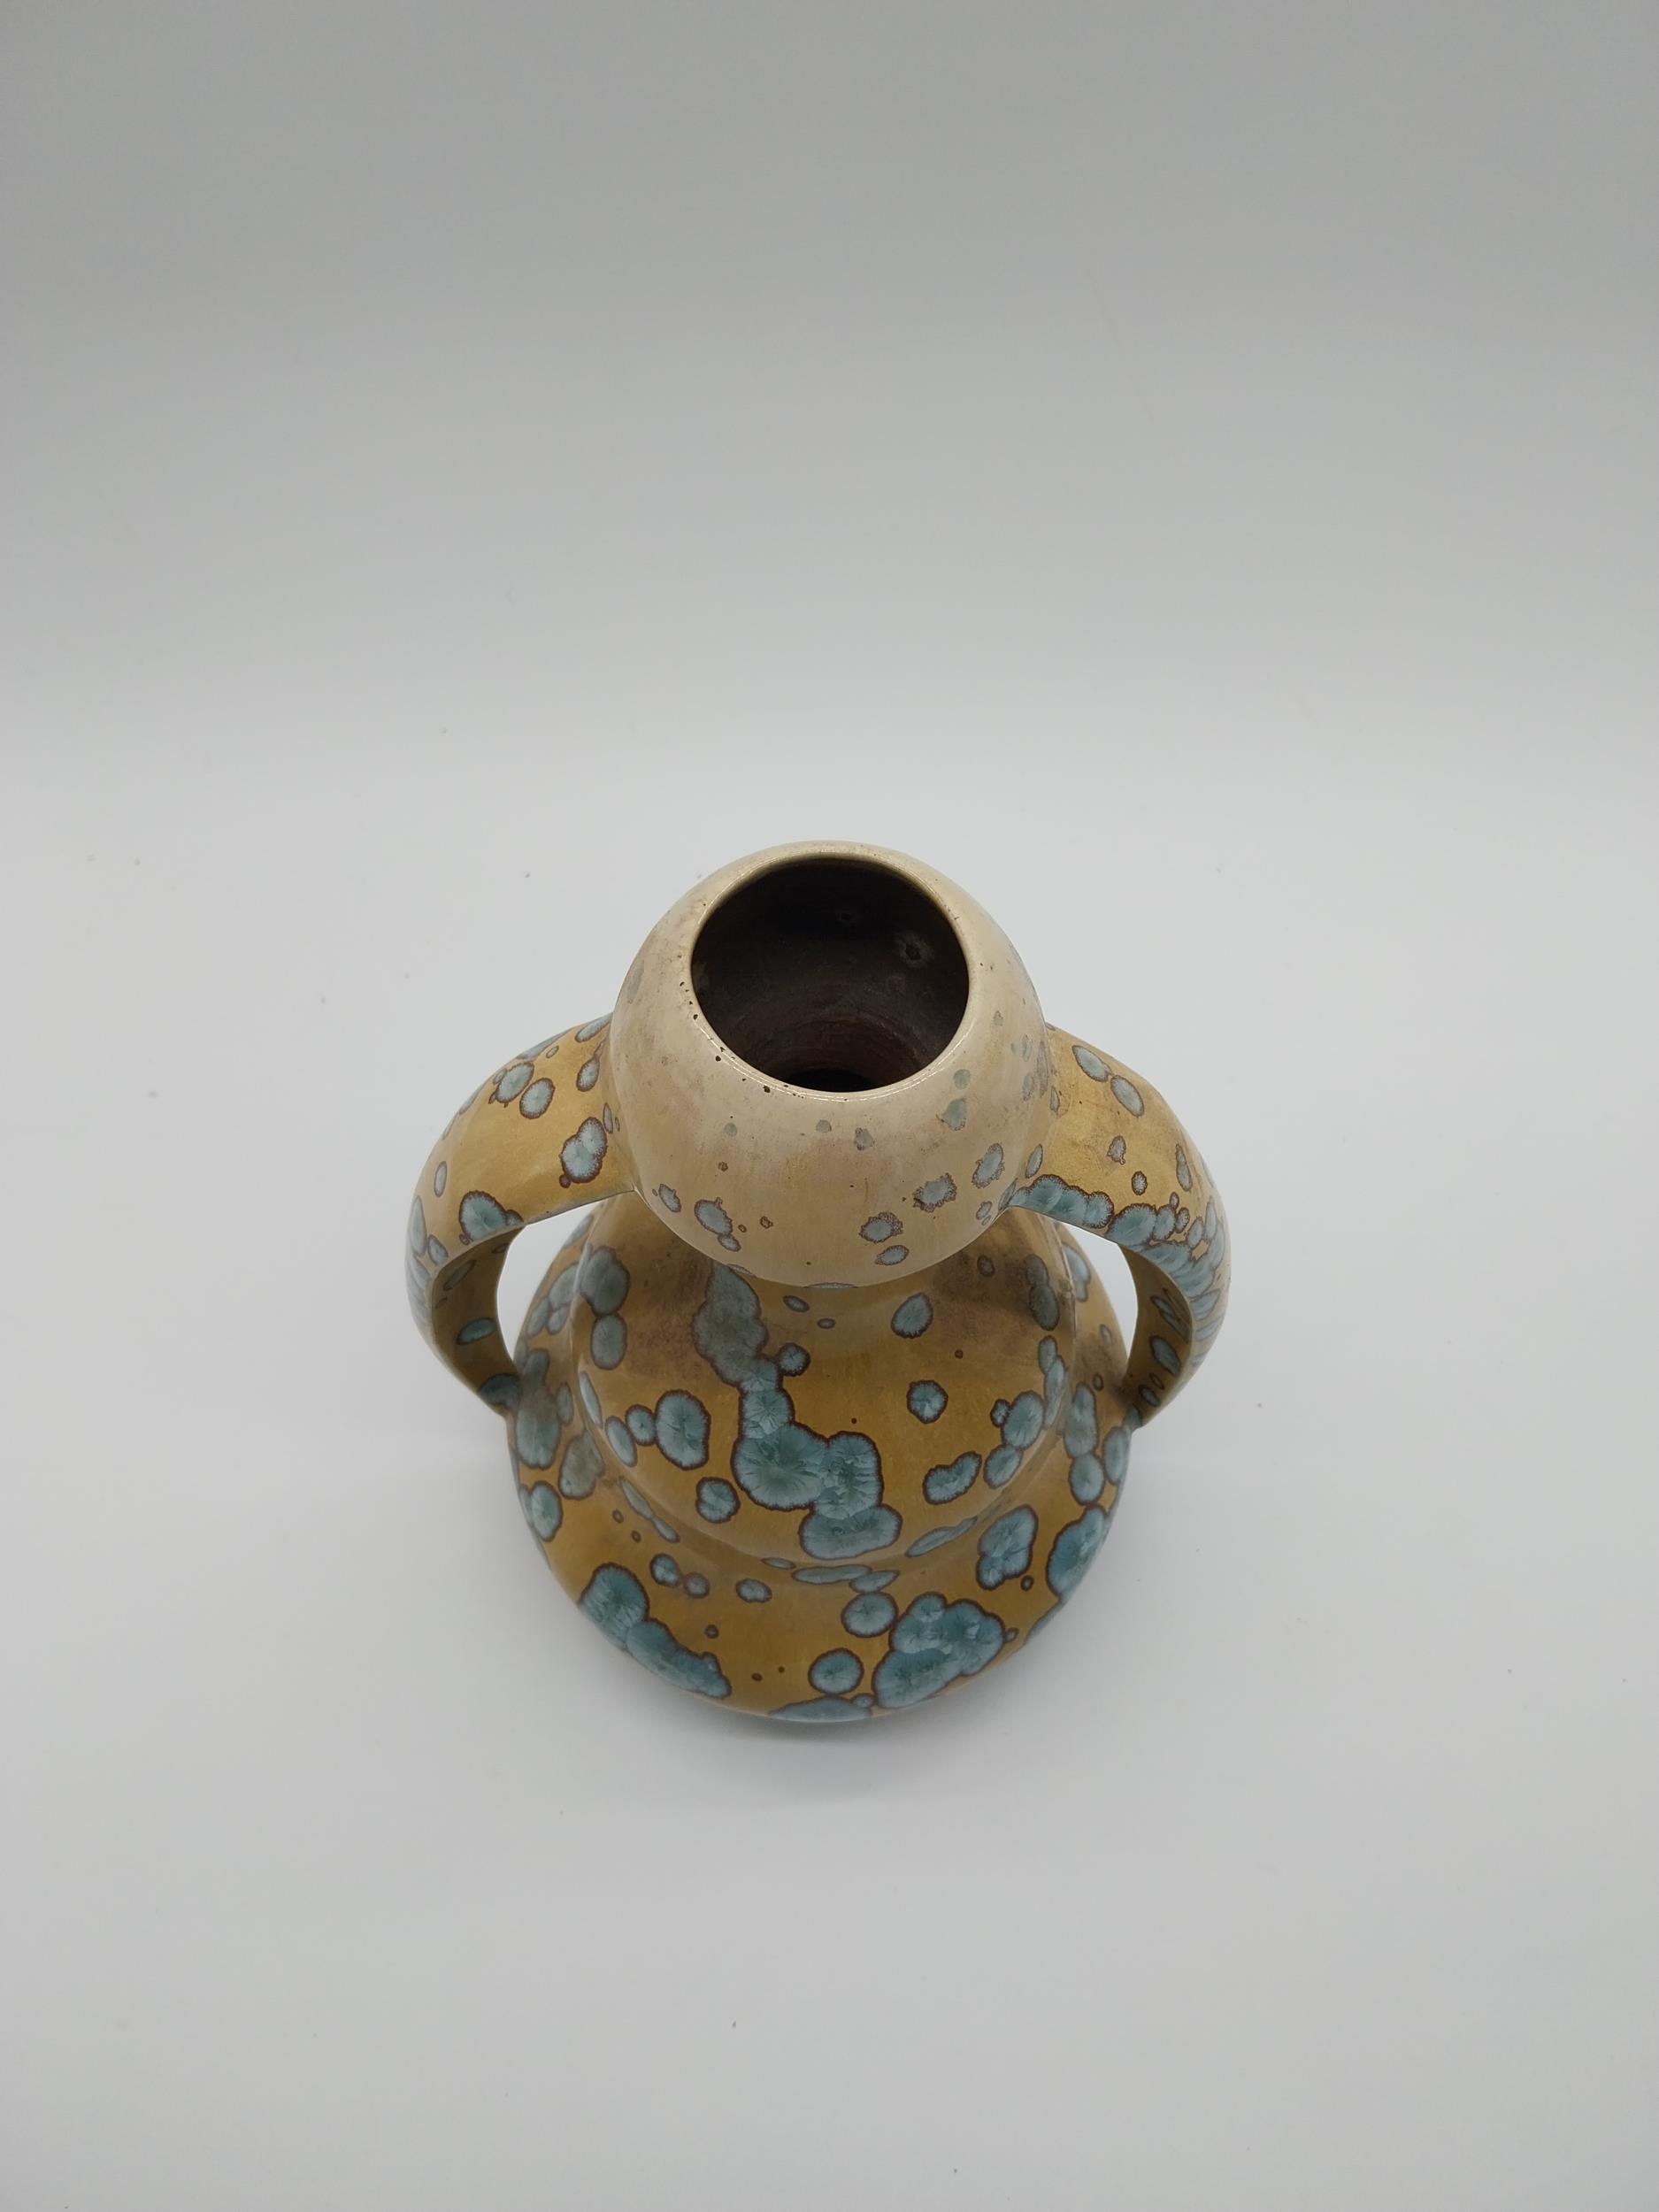 Early 20th C. French ceramic vase with two handles. {26 cm H x 20 cm W x 16 cm D}. - Image 3 of 6